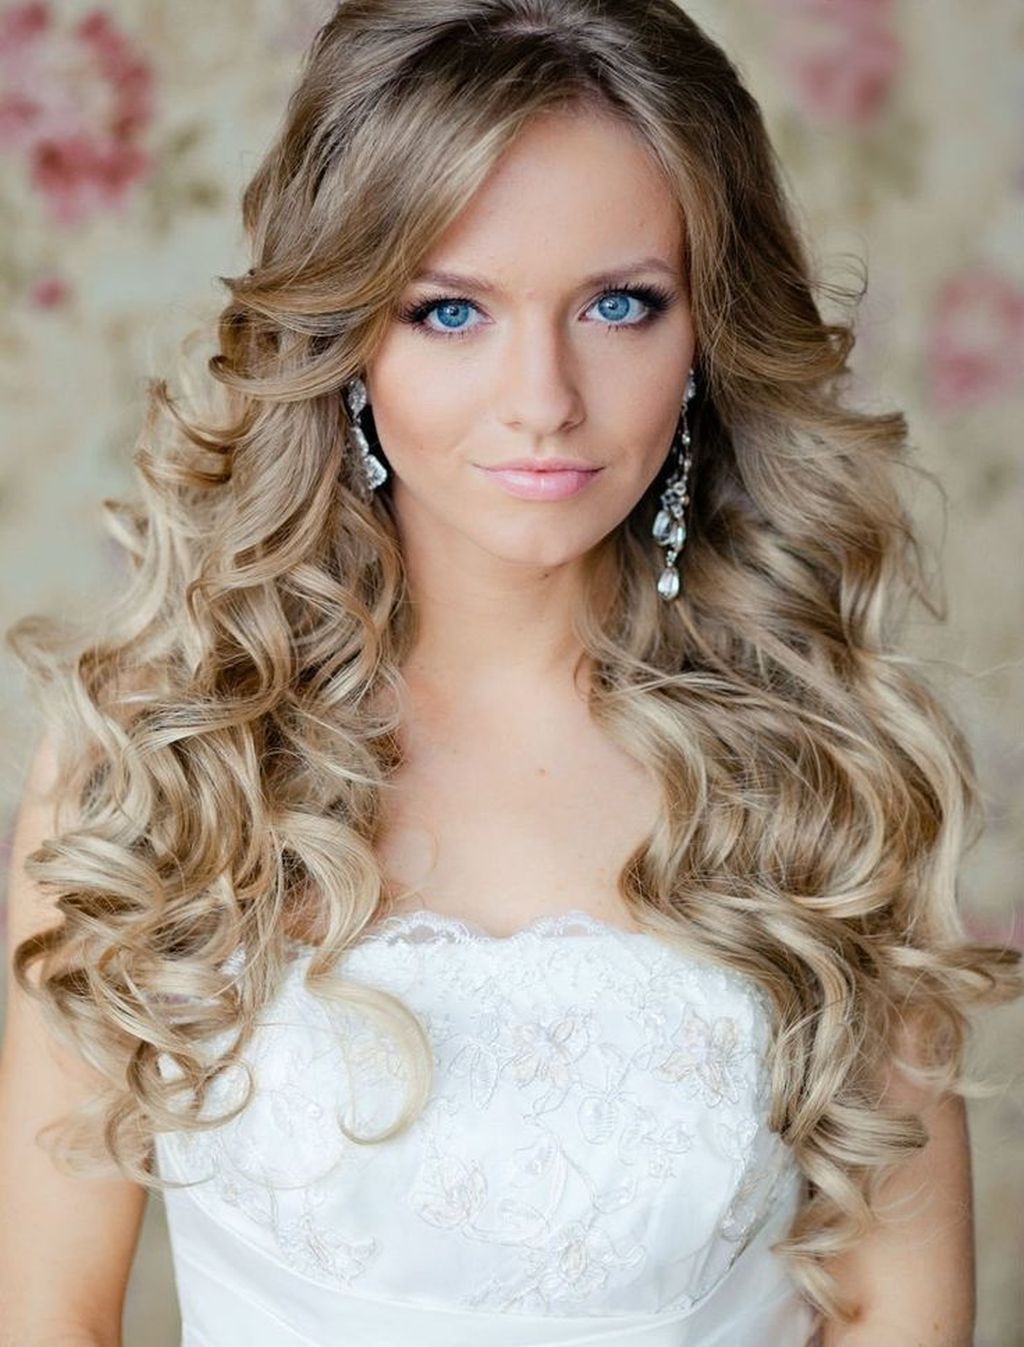 Wedding Hairstyles For Long Hair Images Photos Pictures